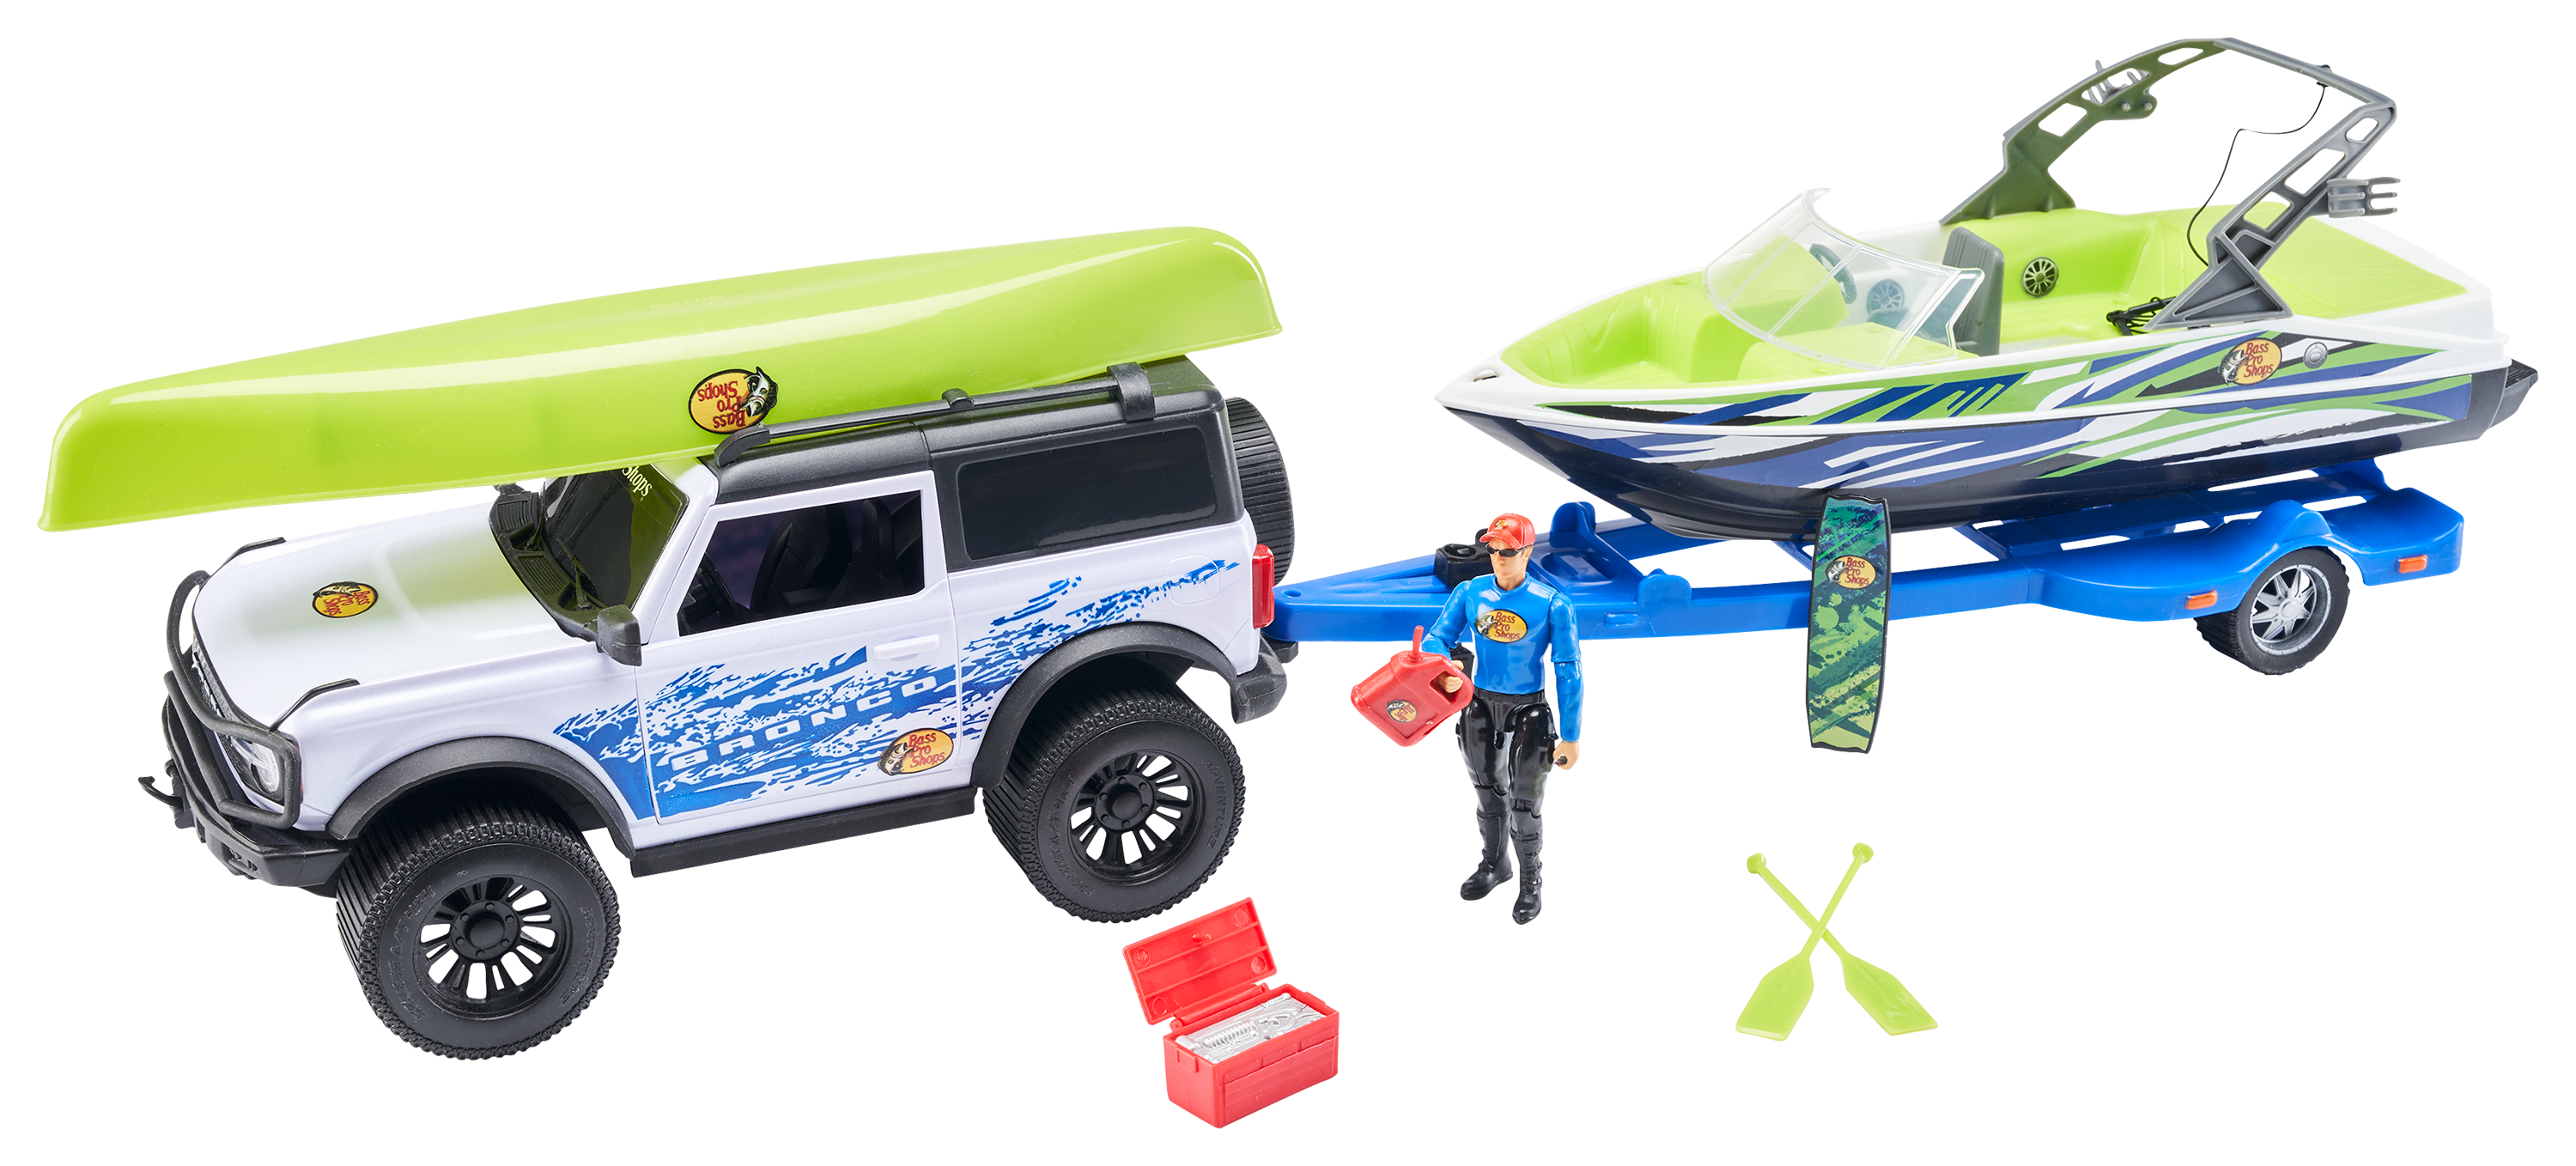 Bass Pro Shops Deluxe Ford Bronco Wake Boat Adventure Playset for Kids